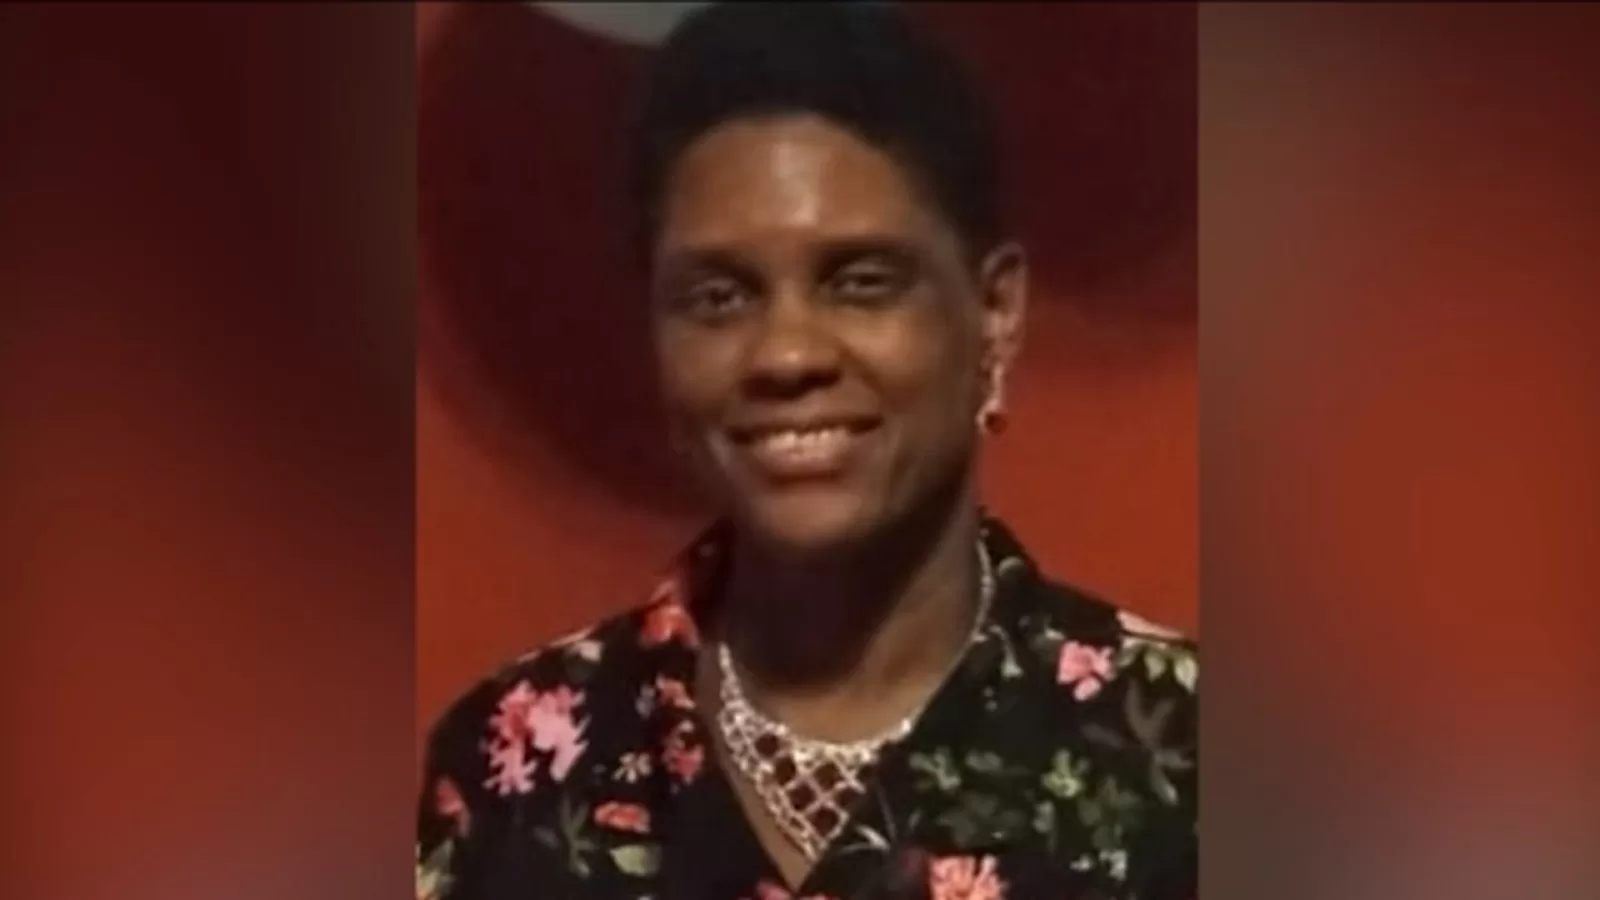 Missing person: Police searching for 47-year-old woman with disabilities who left home in Elmont, Long Island